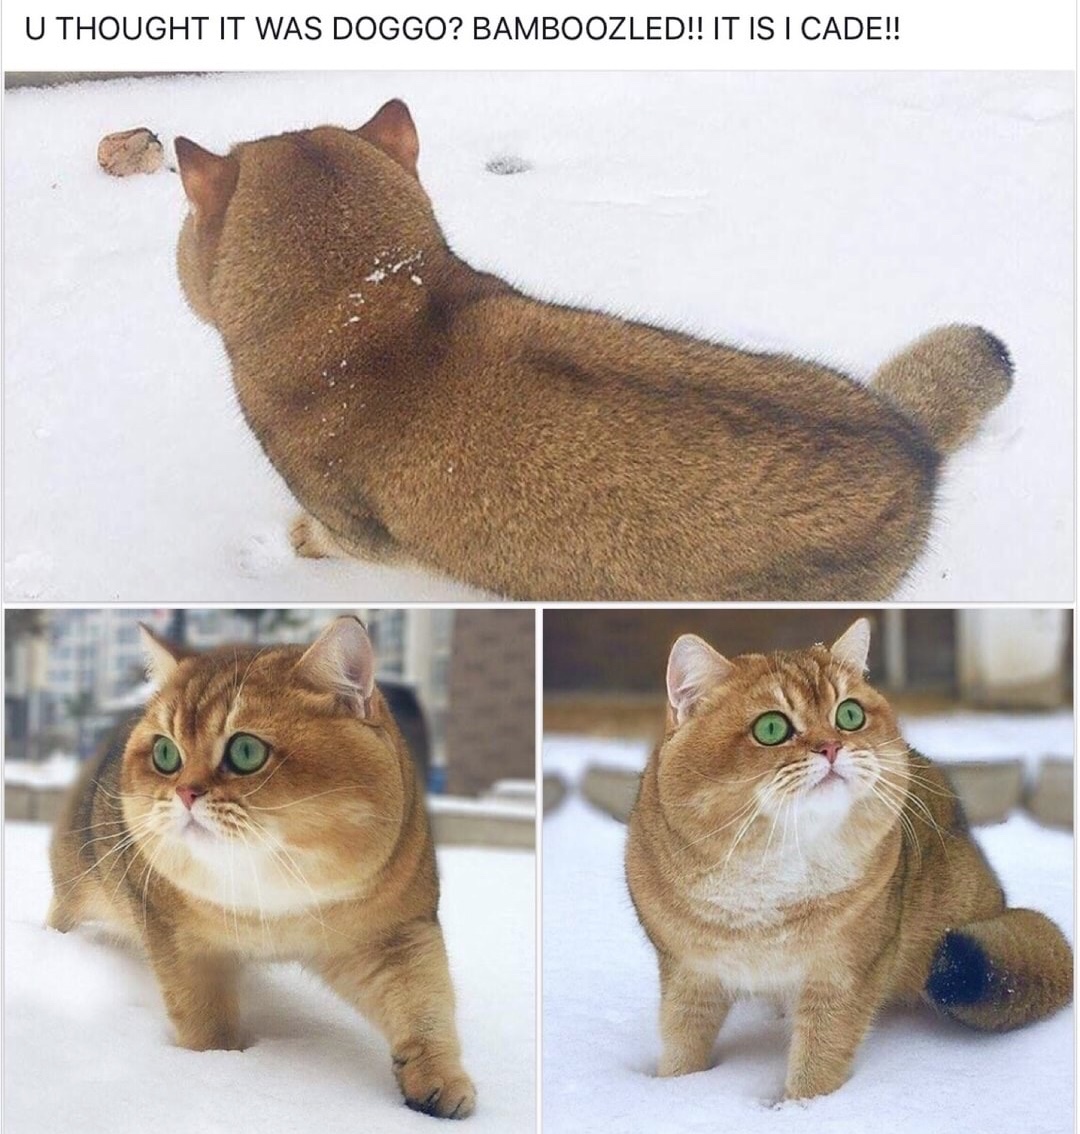 thicc boi cat - U Thought It Was Doggo? Bamboozled!! It Is I Cade!! O